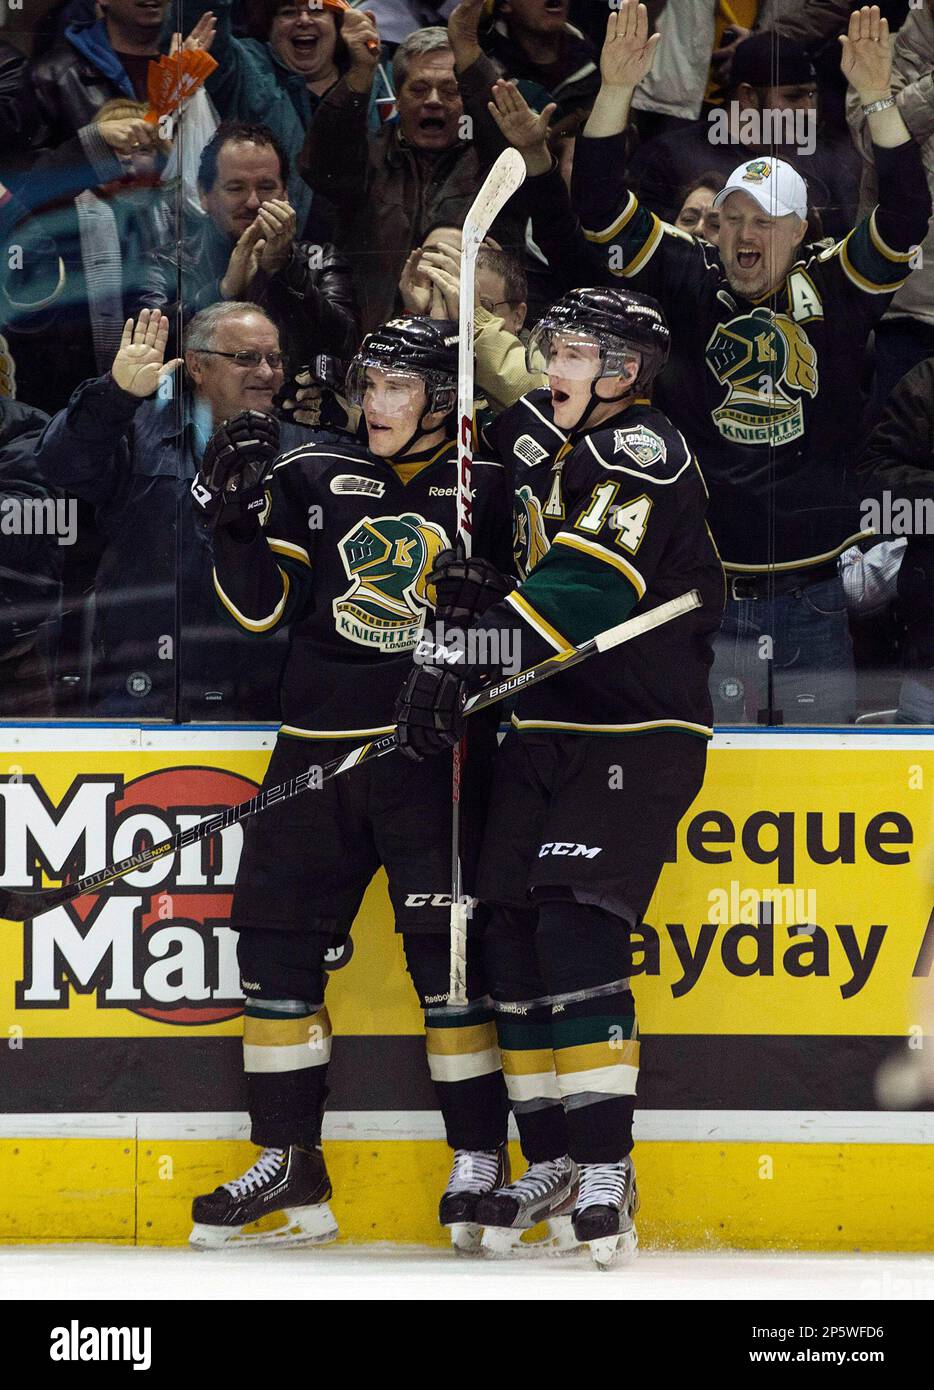 London Knights Bo Horvat, left, celebrates his goal with Tommy Hughes against the Sarnia Sting during the first period of their OHL hockey match, Tuesday, Jan